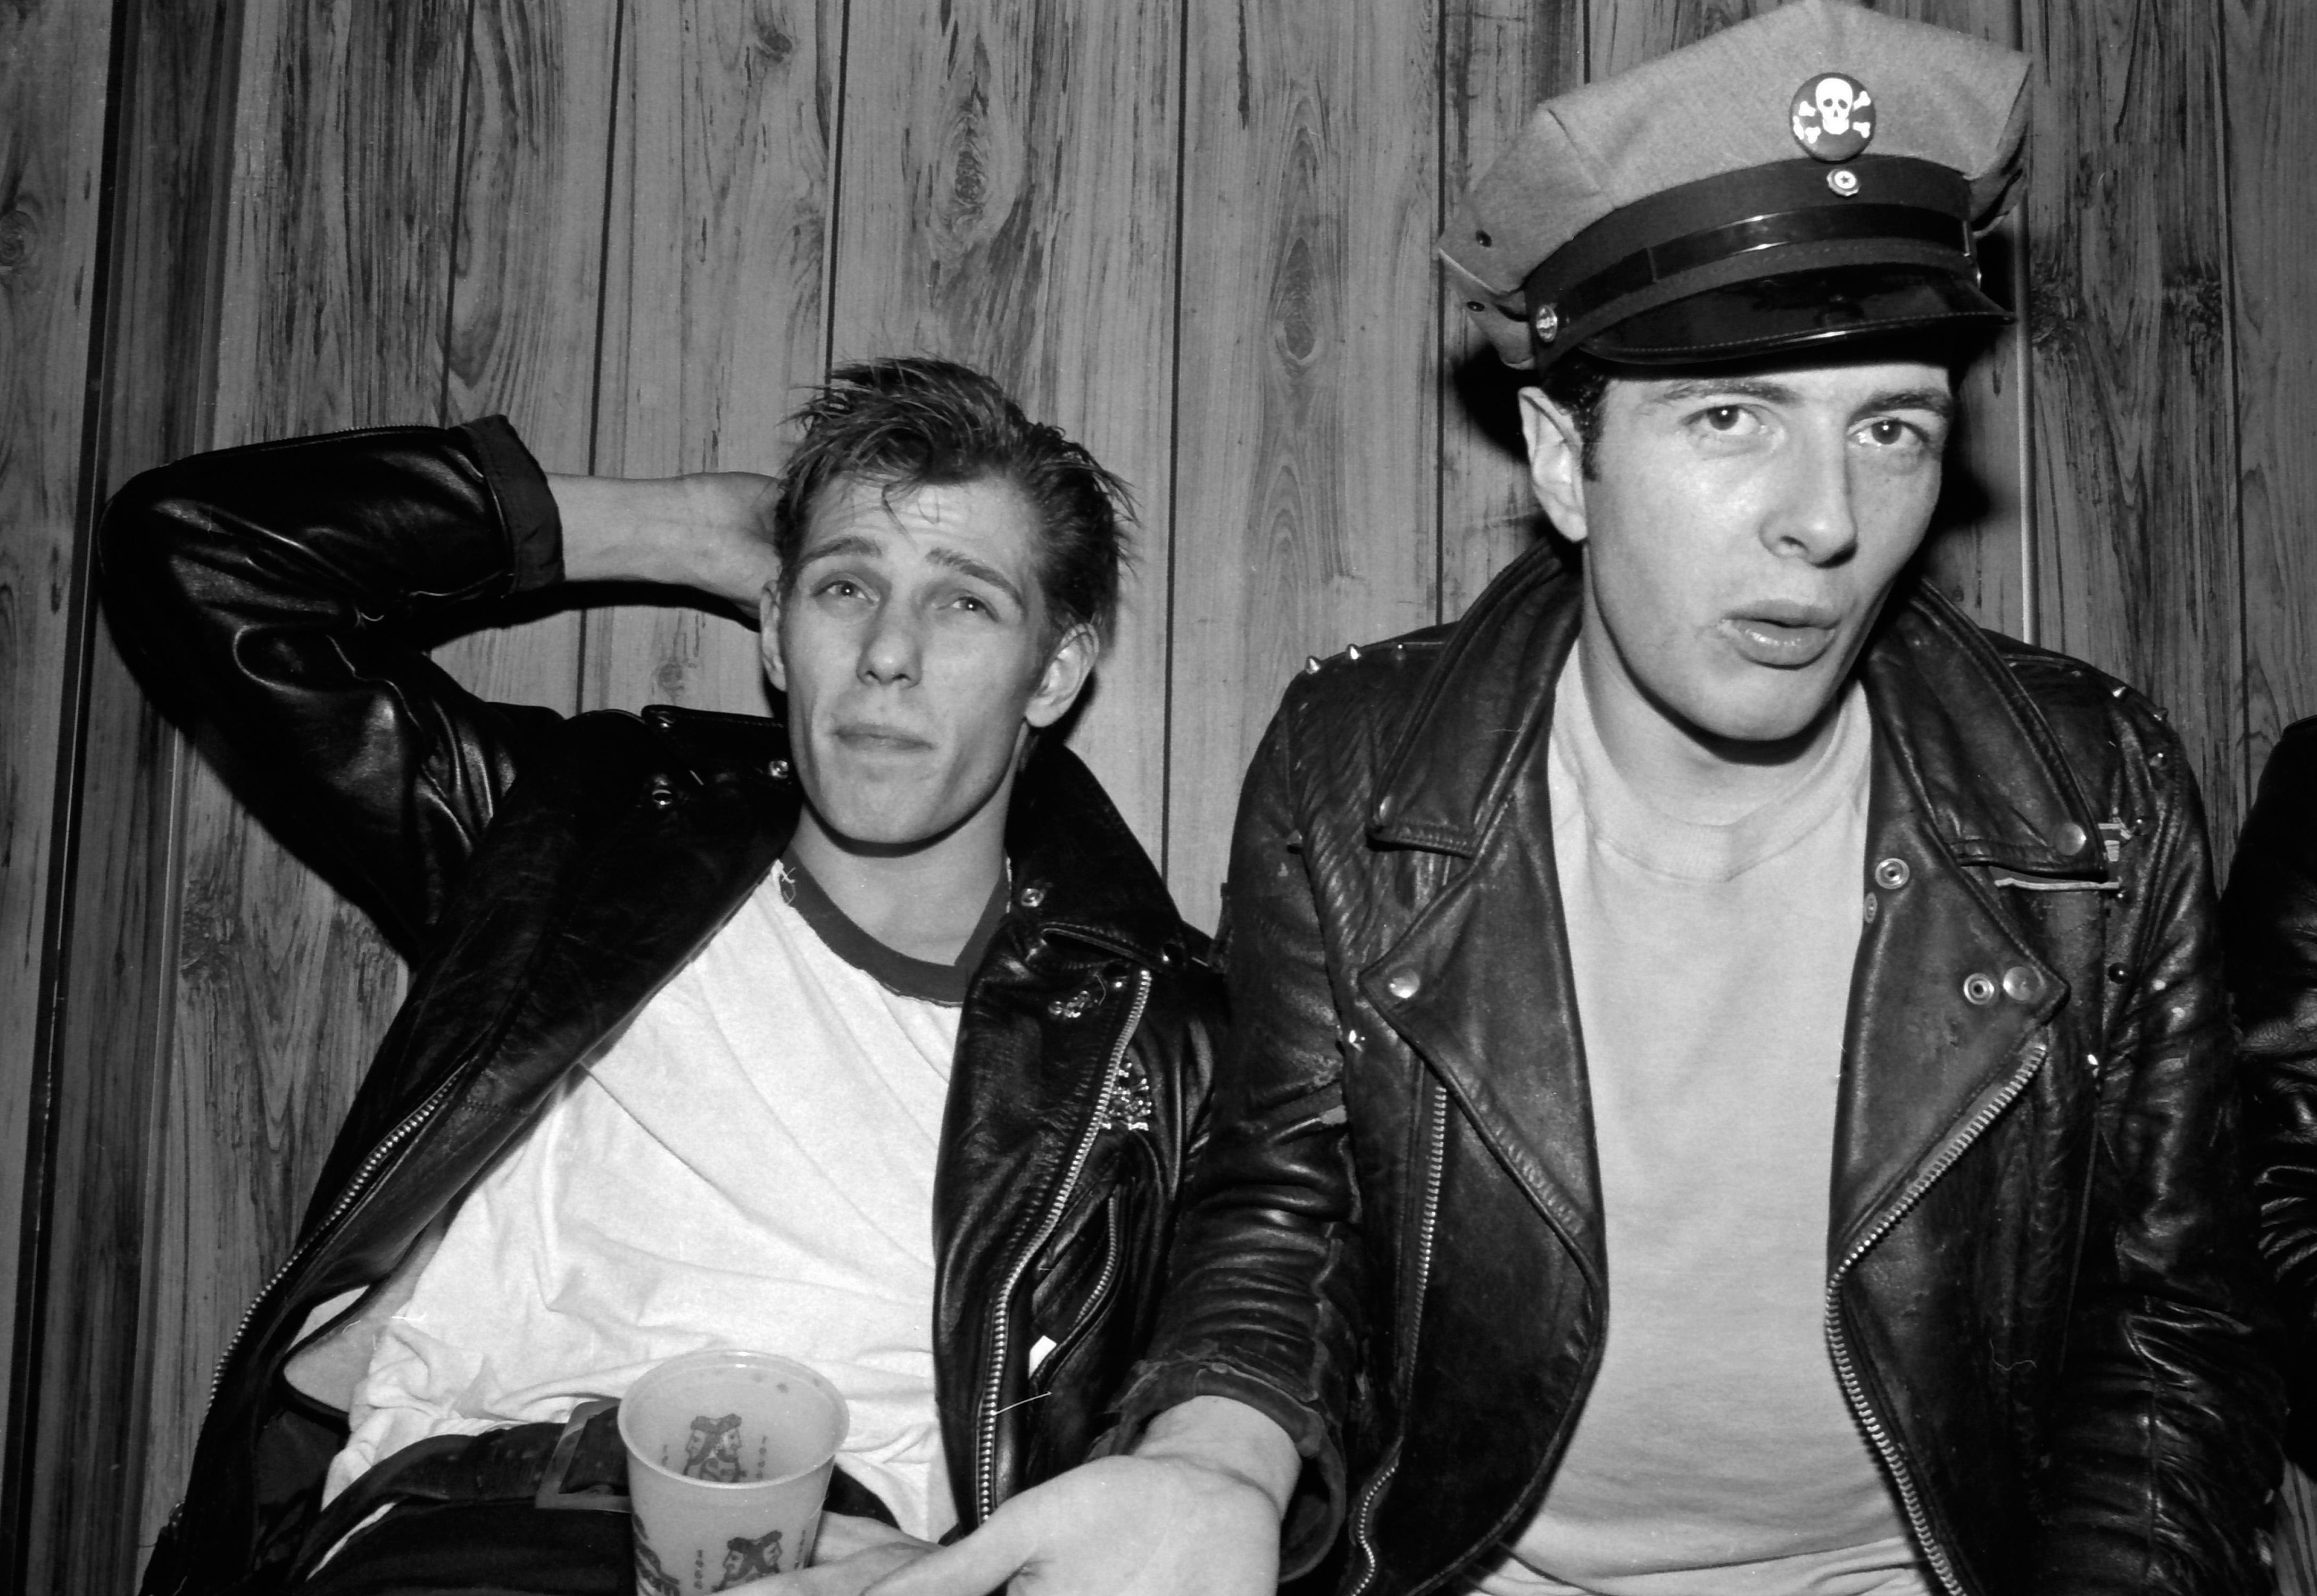 Signed limited edition print of Bassist Paul Simonon and lead singer Joe Strummer of British punk rock band The Clash backstage at the Agora Theatre in Cleveland, Ohio on February 13, 1979,  by Janet Macoska

Framed, signed limited edition number